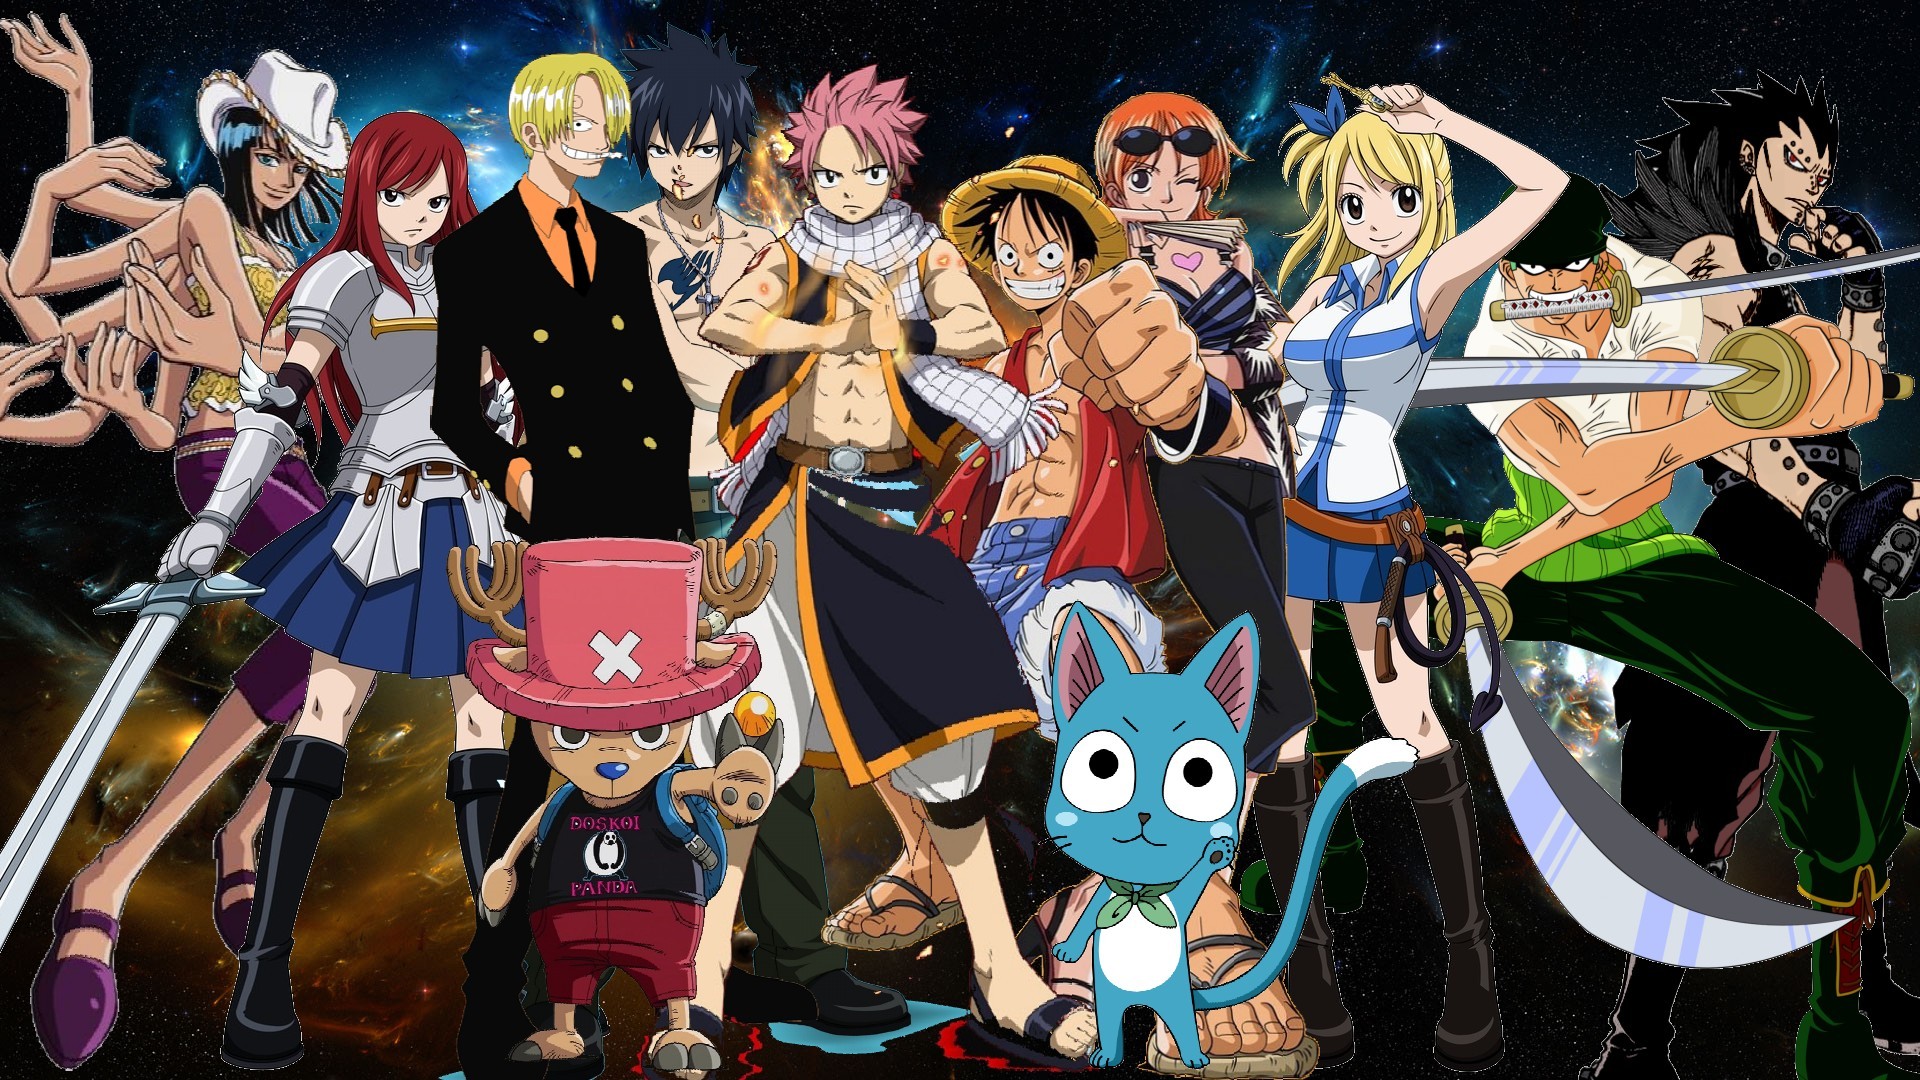 Fairy Tail Wallpaper Windows Manga Pictures In High